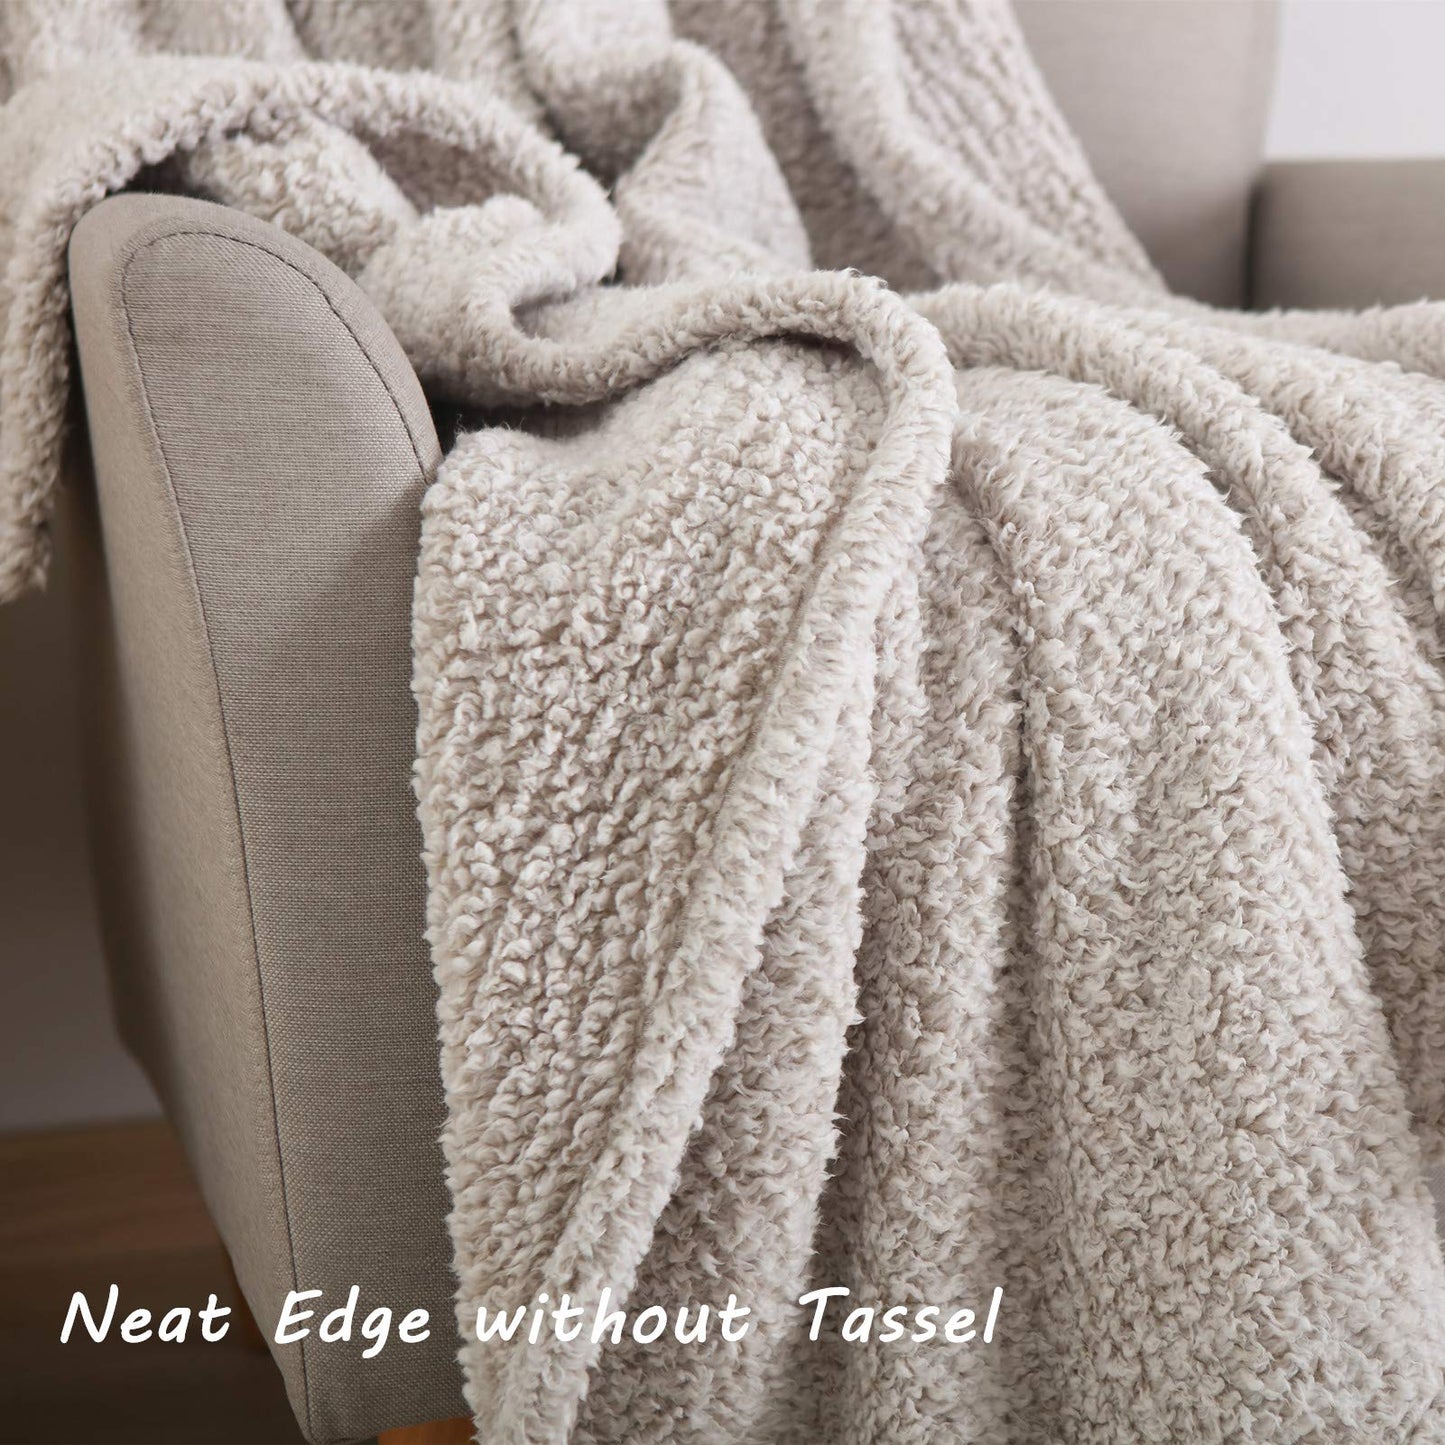 Ombre Taupe Ultra Soft Cozy Sherpa Throw Blanket